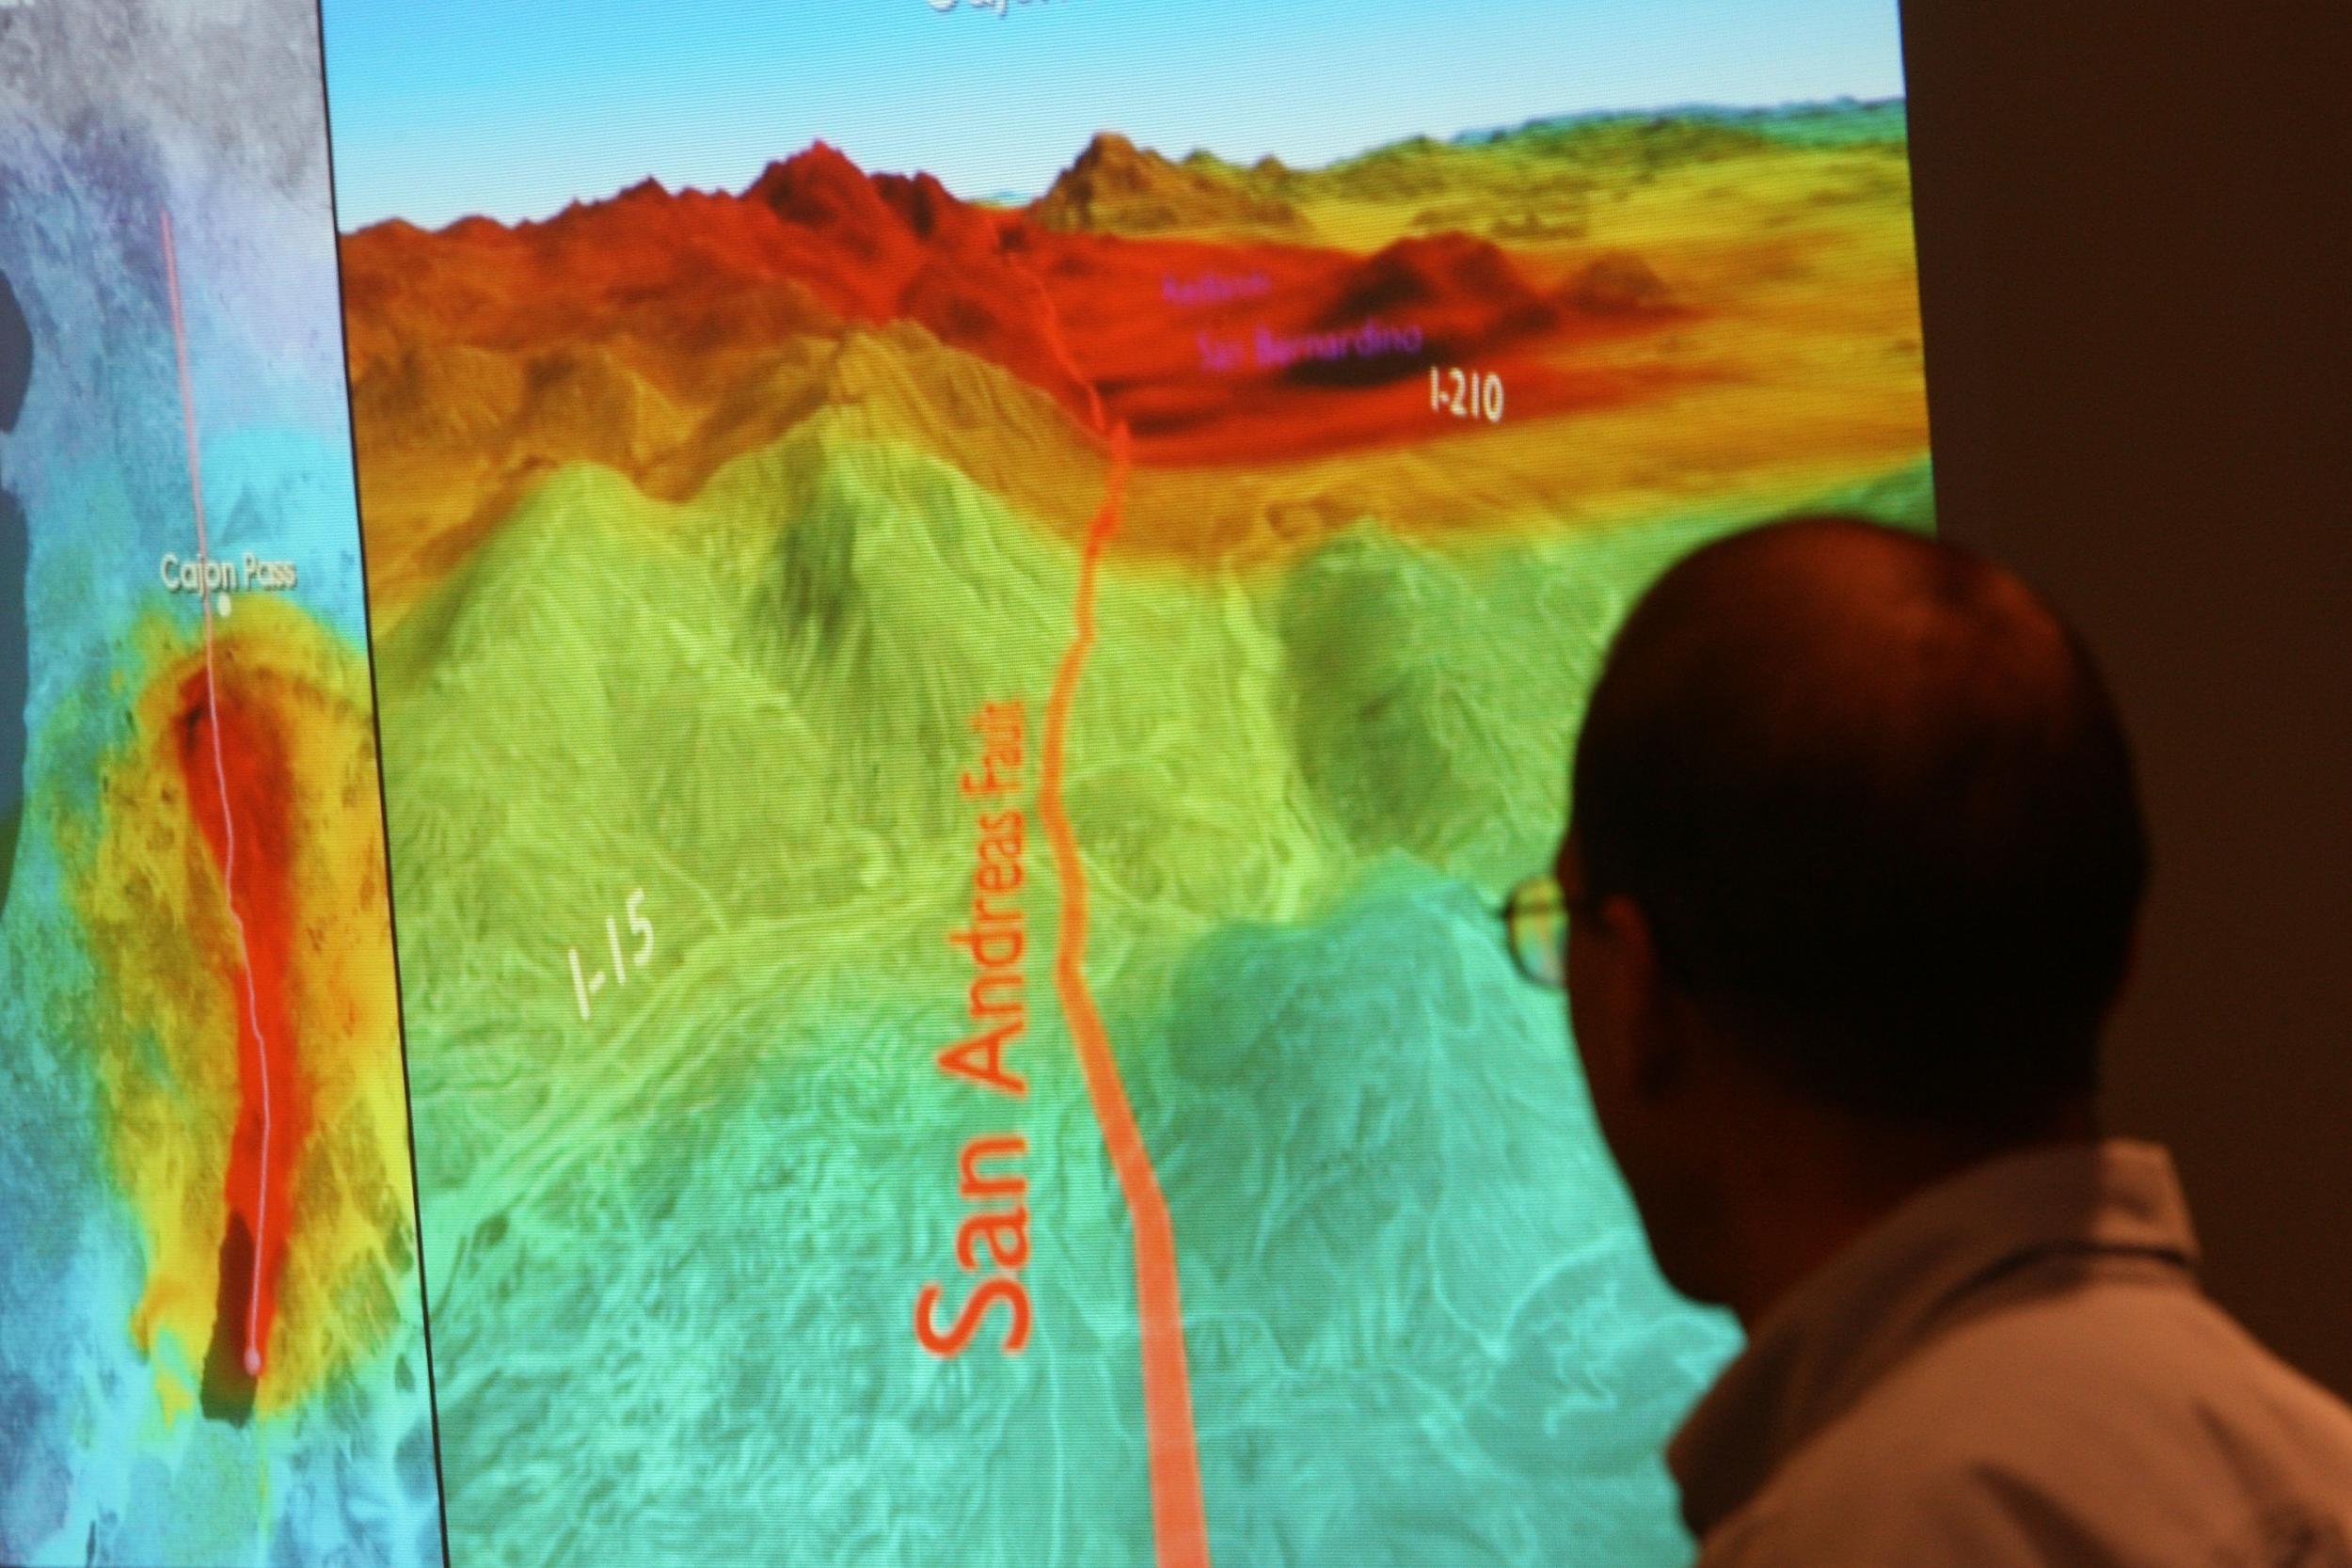 A computer model illustrates how shock waves from a 7.8 magnitude earthquake on the San Andreas Fault would affect southern California